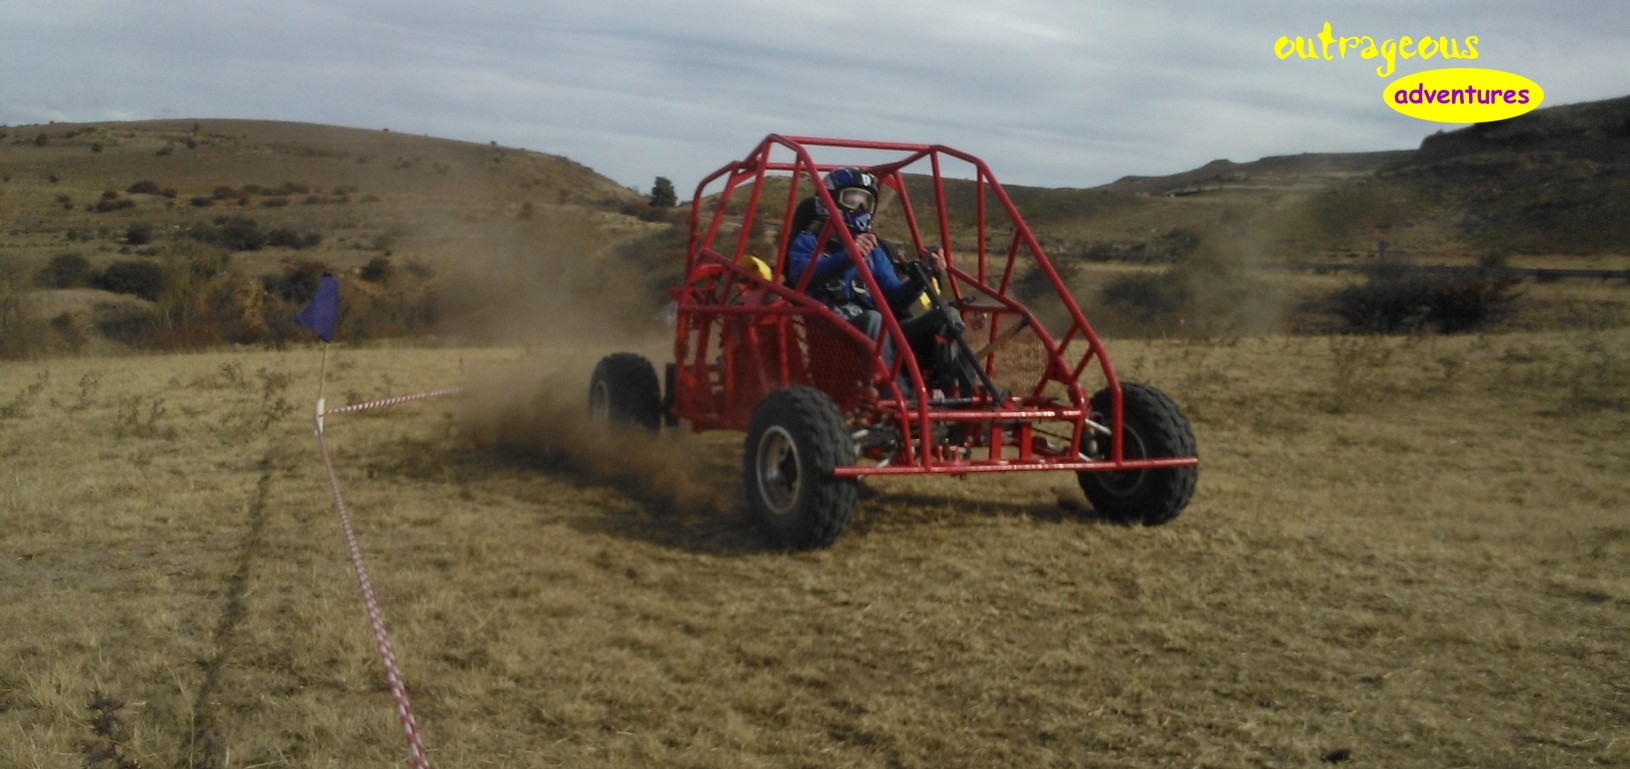 adventure racing buggies! Feed your need for speed!